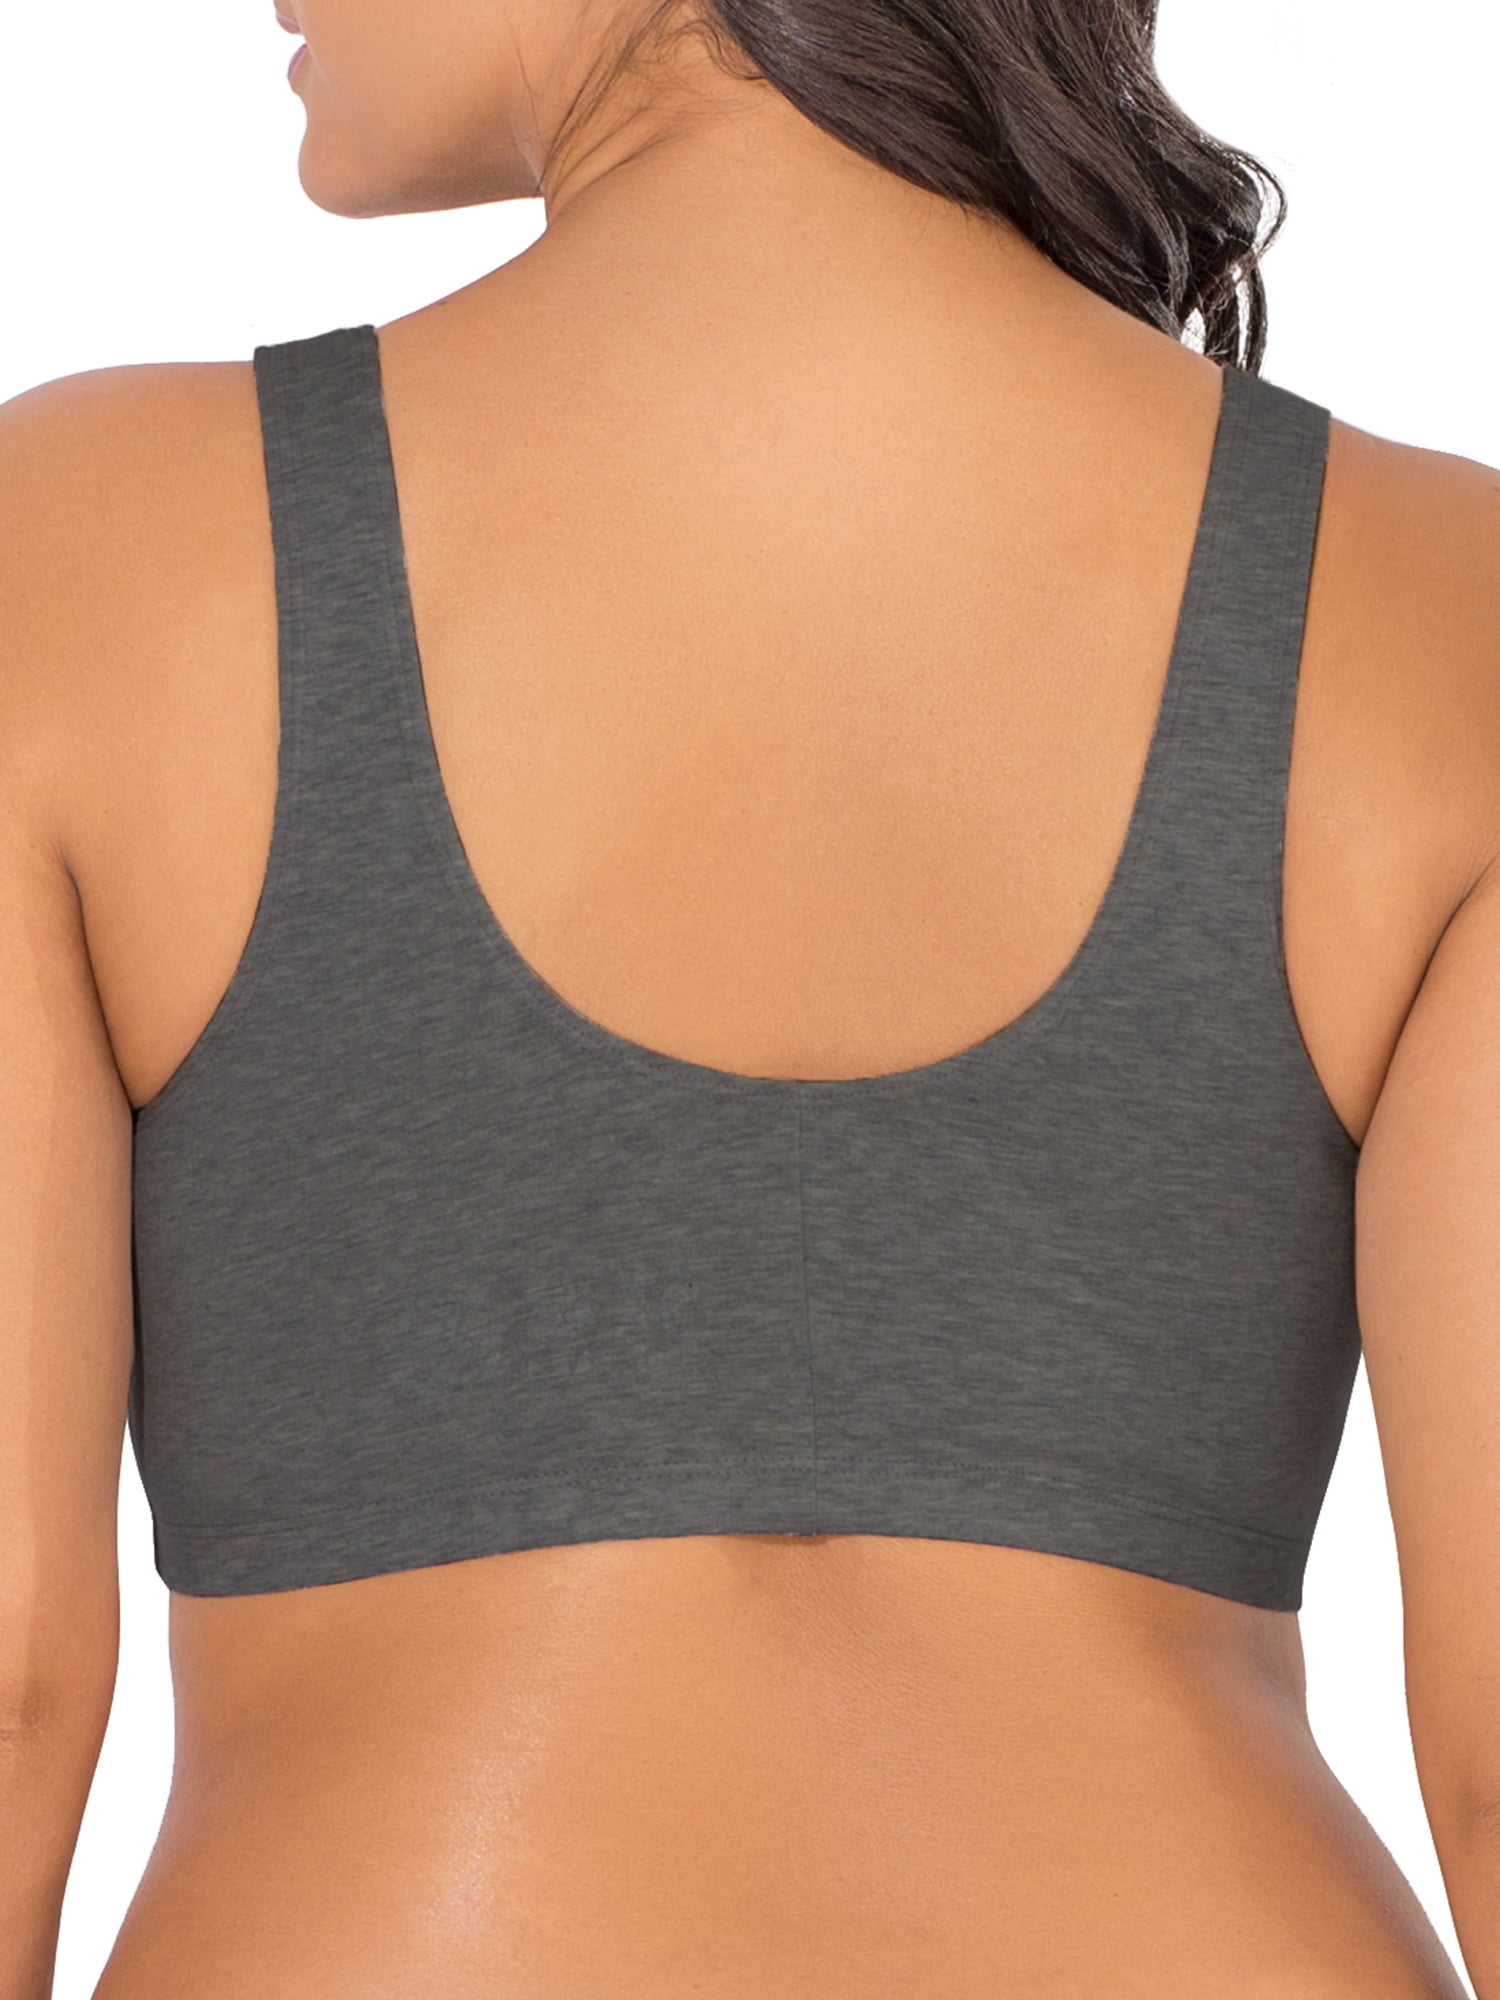 Fruit of the Loom Women's Comfort Front Close Sports Bra, Style